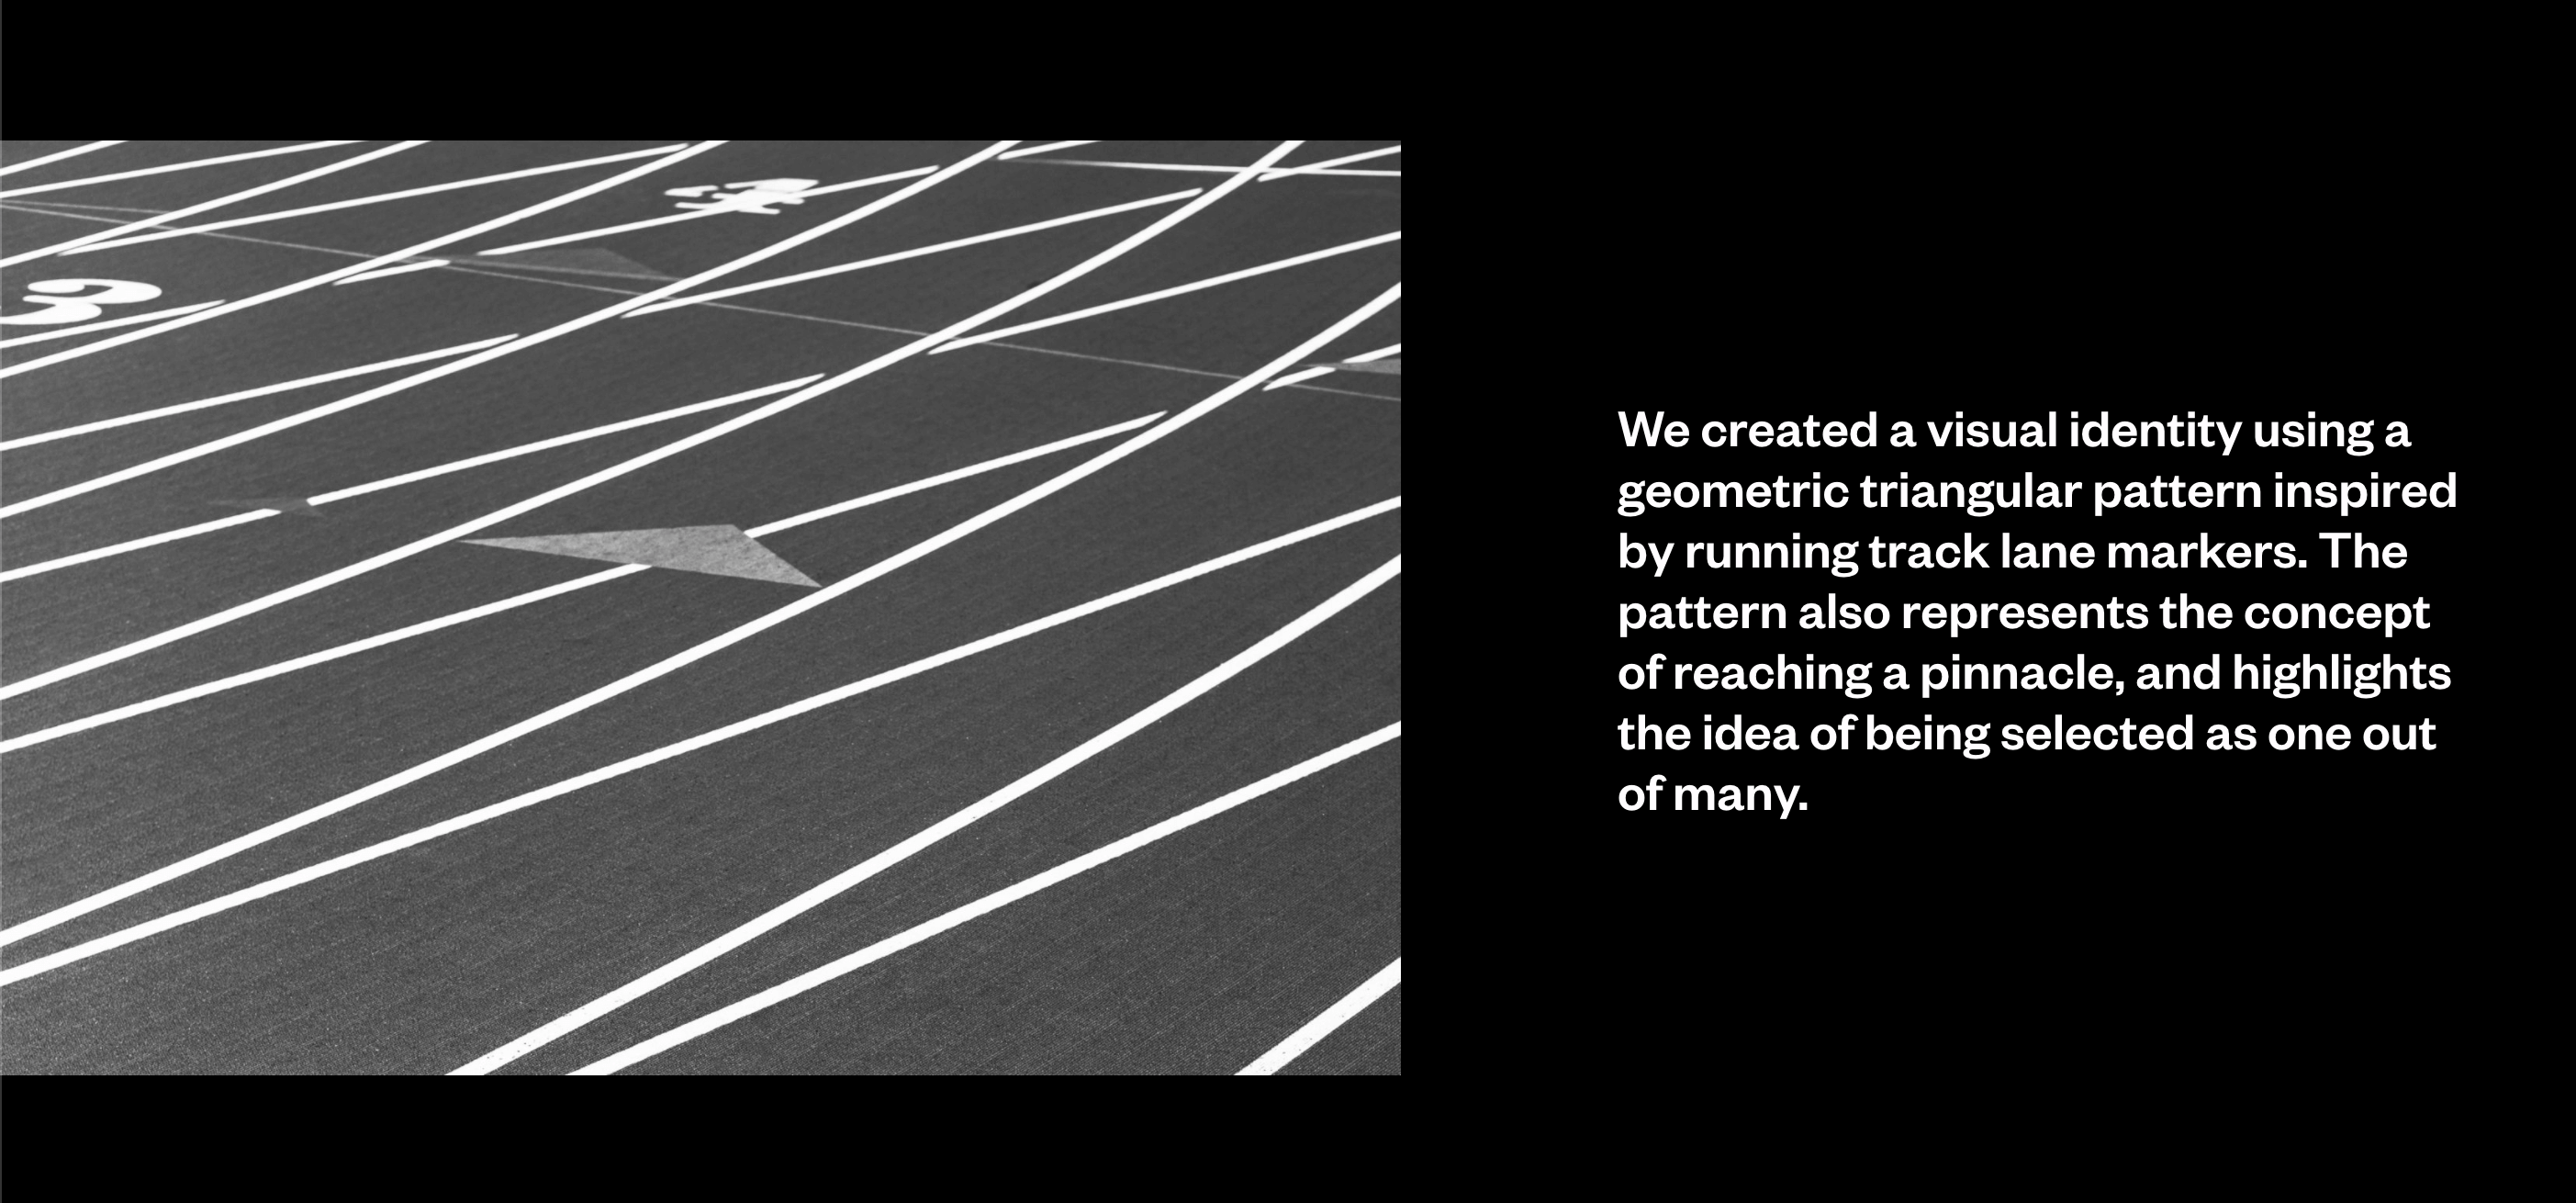 An excerpt from the Nike Pro Services brand guide featuring a black and white photo pf a running track and text that reads "we created a visual identity using a geometric triangular pattern inspired by running lane markers. The pattern also represents the concept of reaching a pinnacle, and highlights the idea of being selected as one out of many."